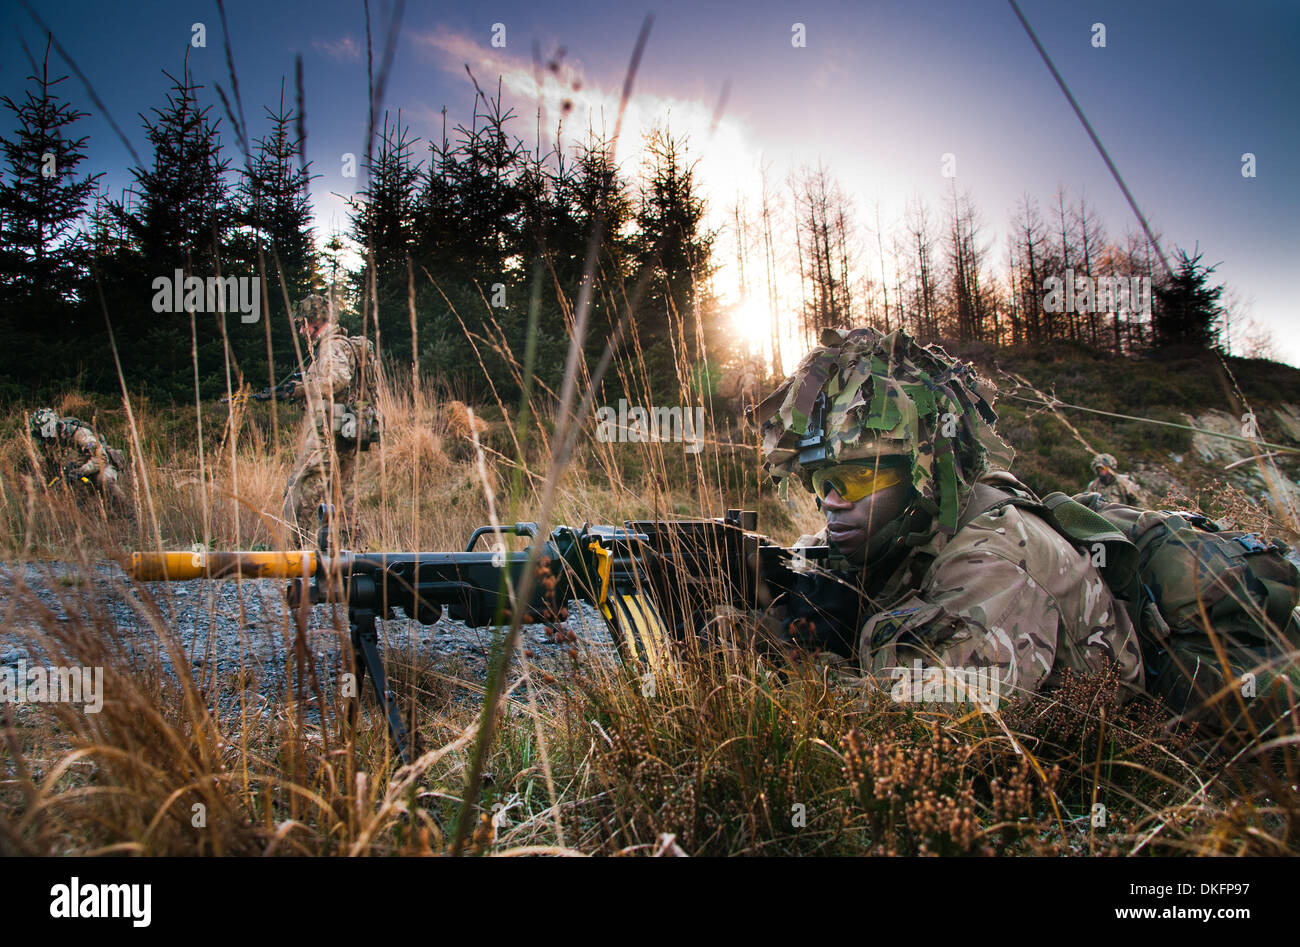 Soldiers from 3 Rifles on exercise Stock Photo